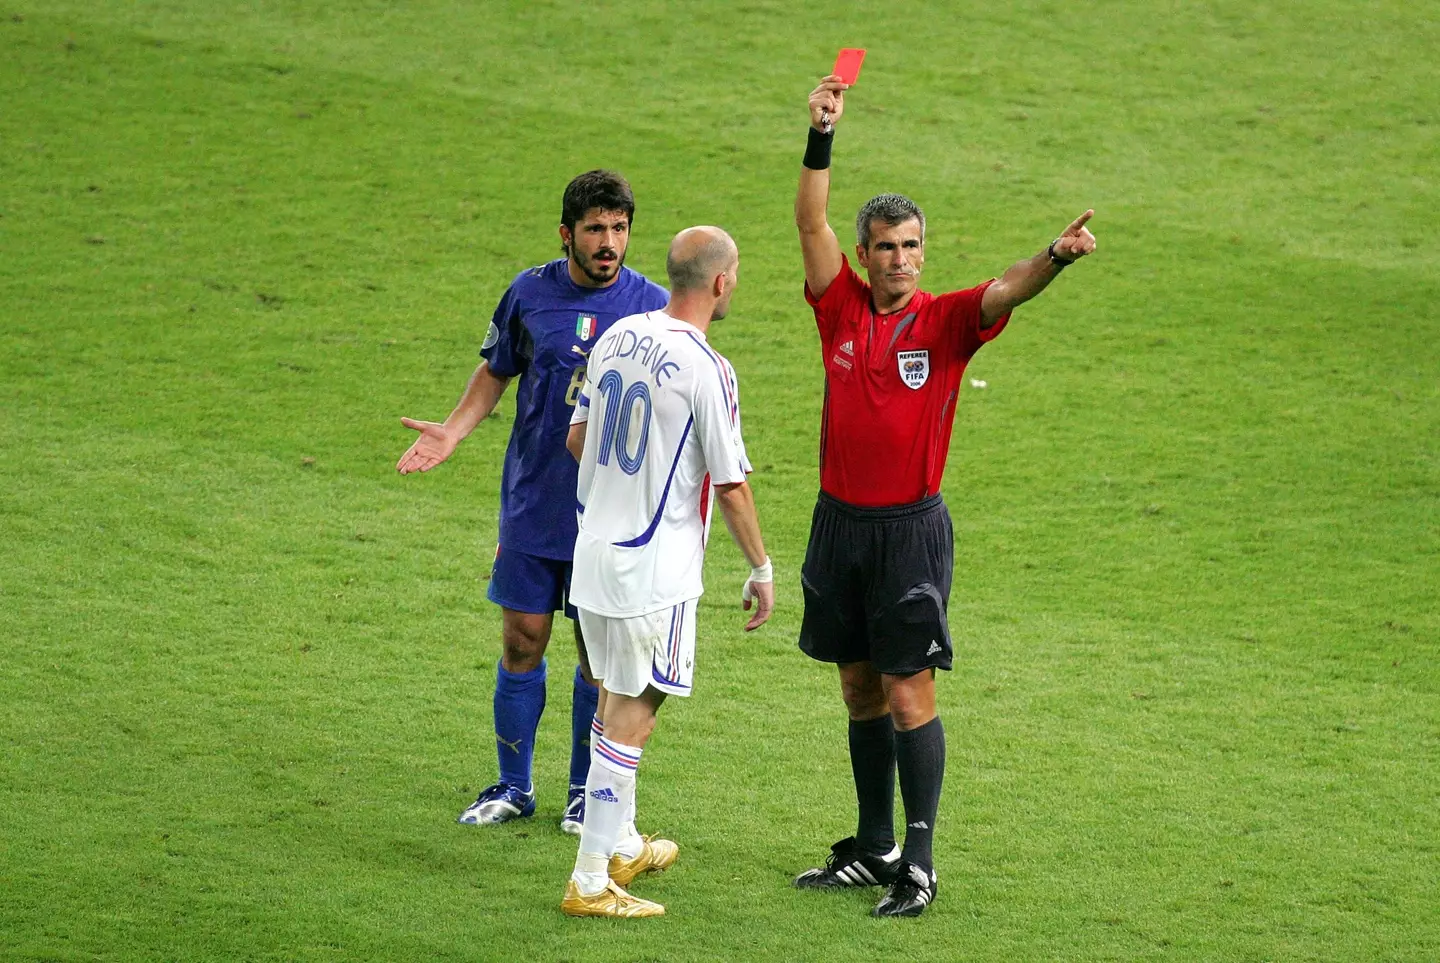 Zidane in the World Cup final